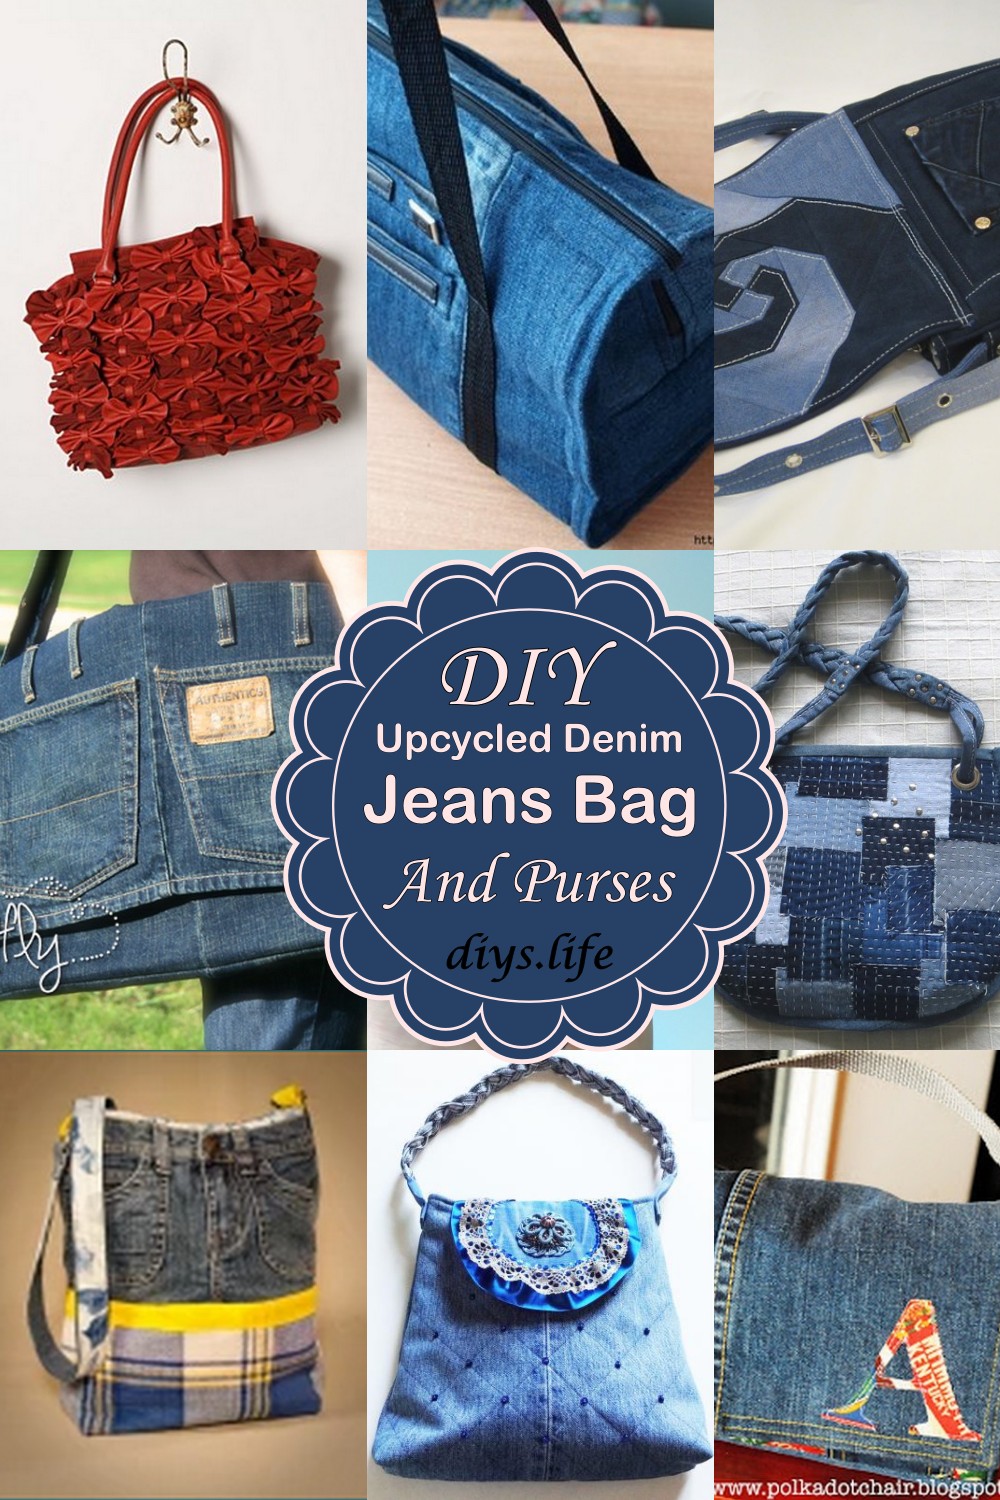 Upcycled Denim Jeans Bag And Purses